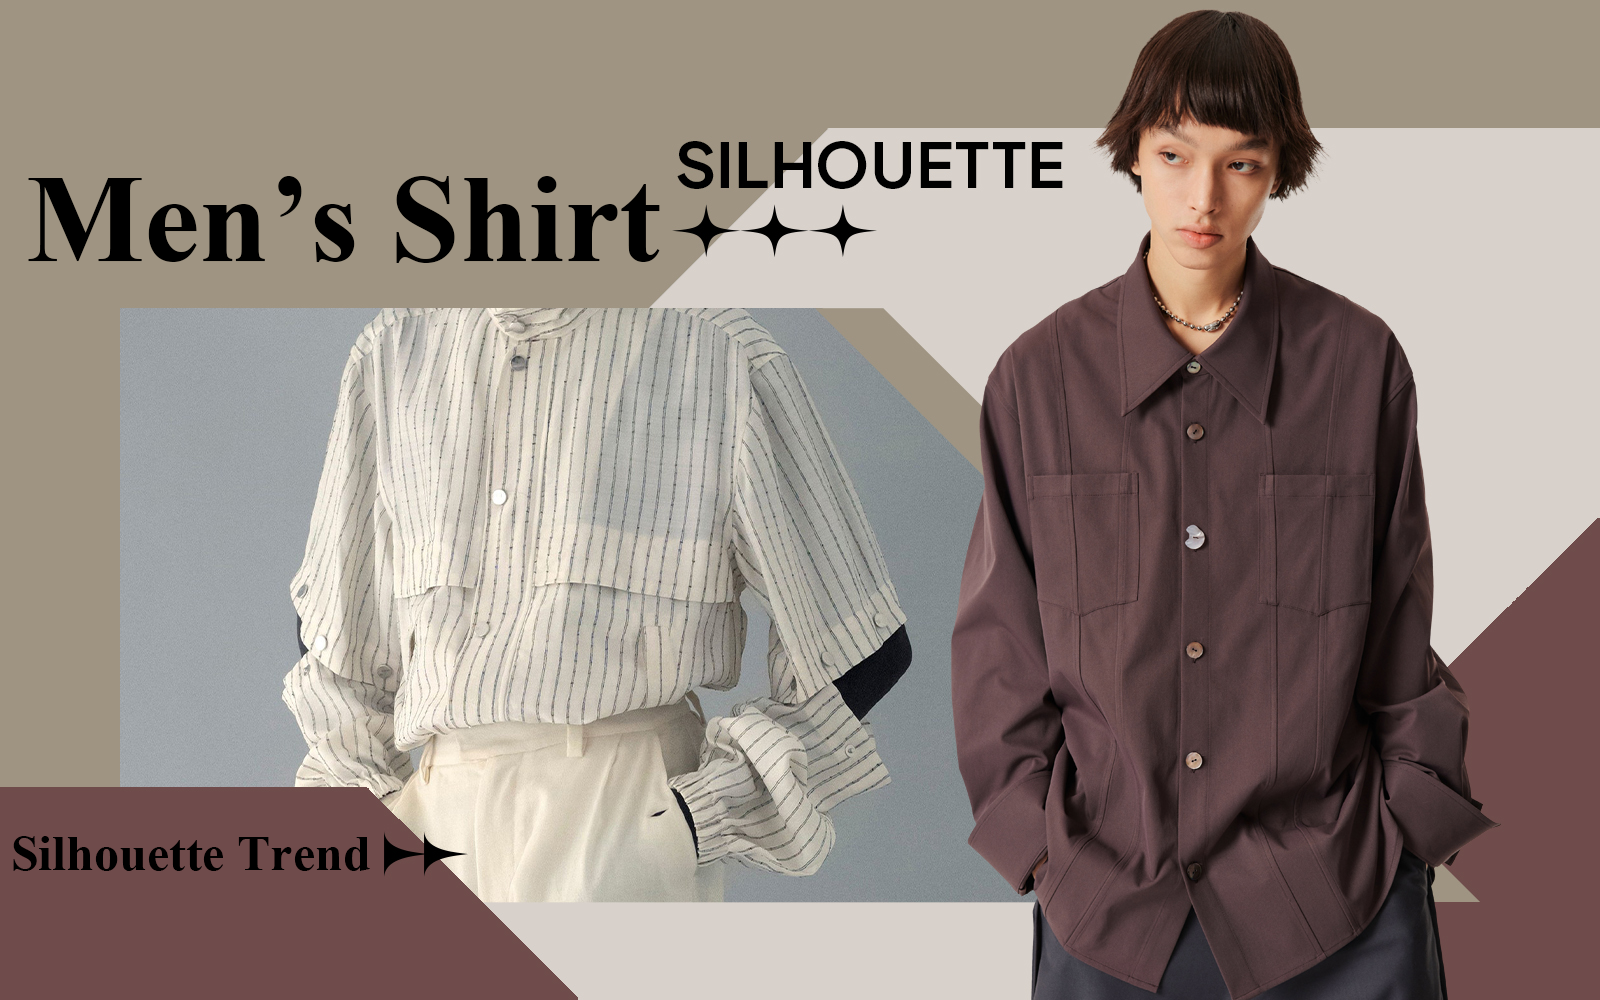 Focus of Autumn -- The Silhouette Trend for Men's Shirt